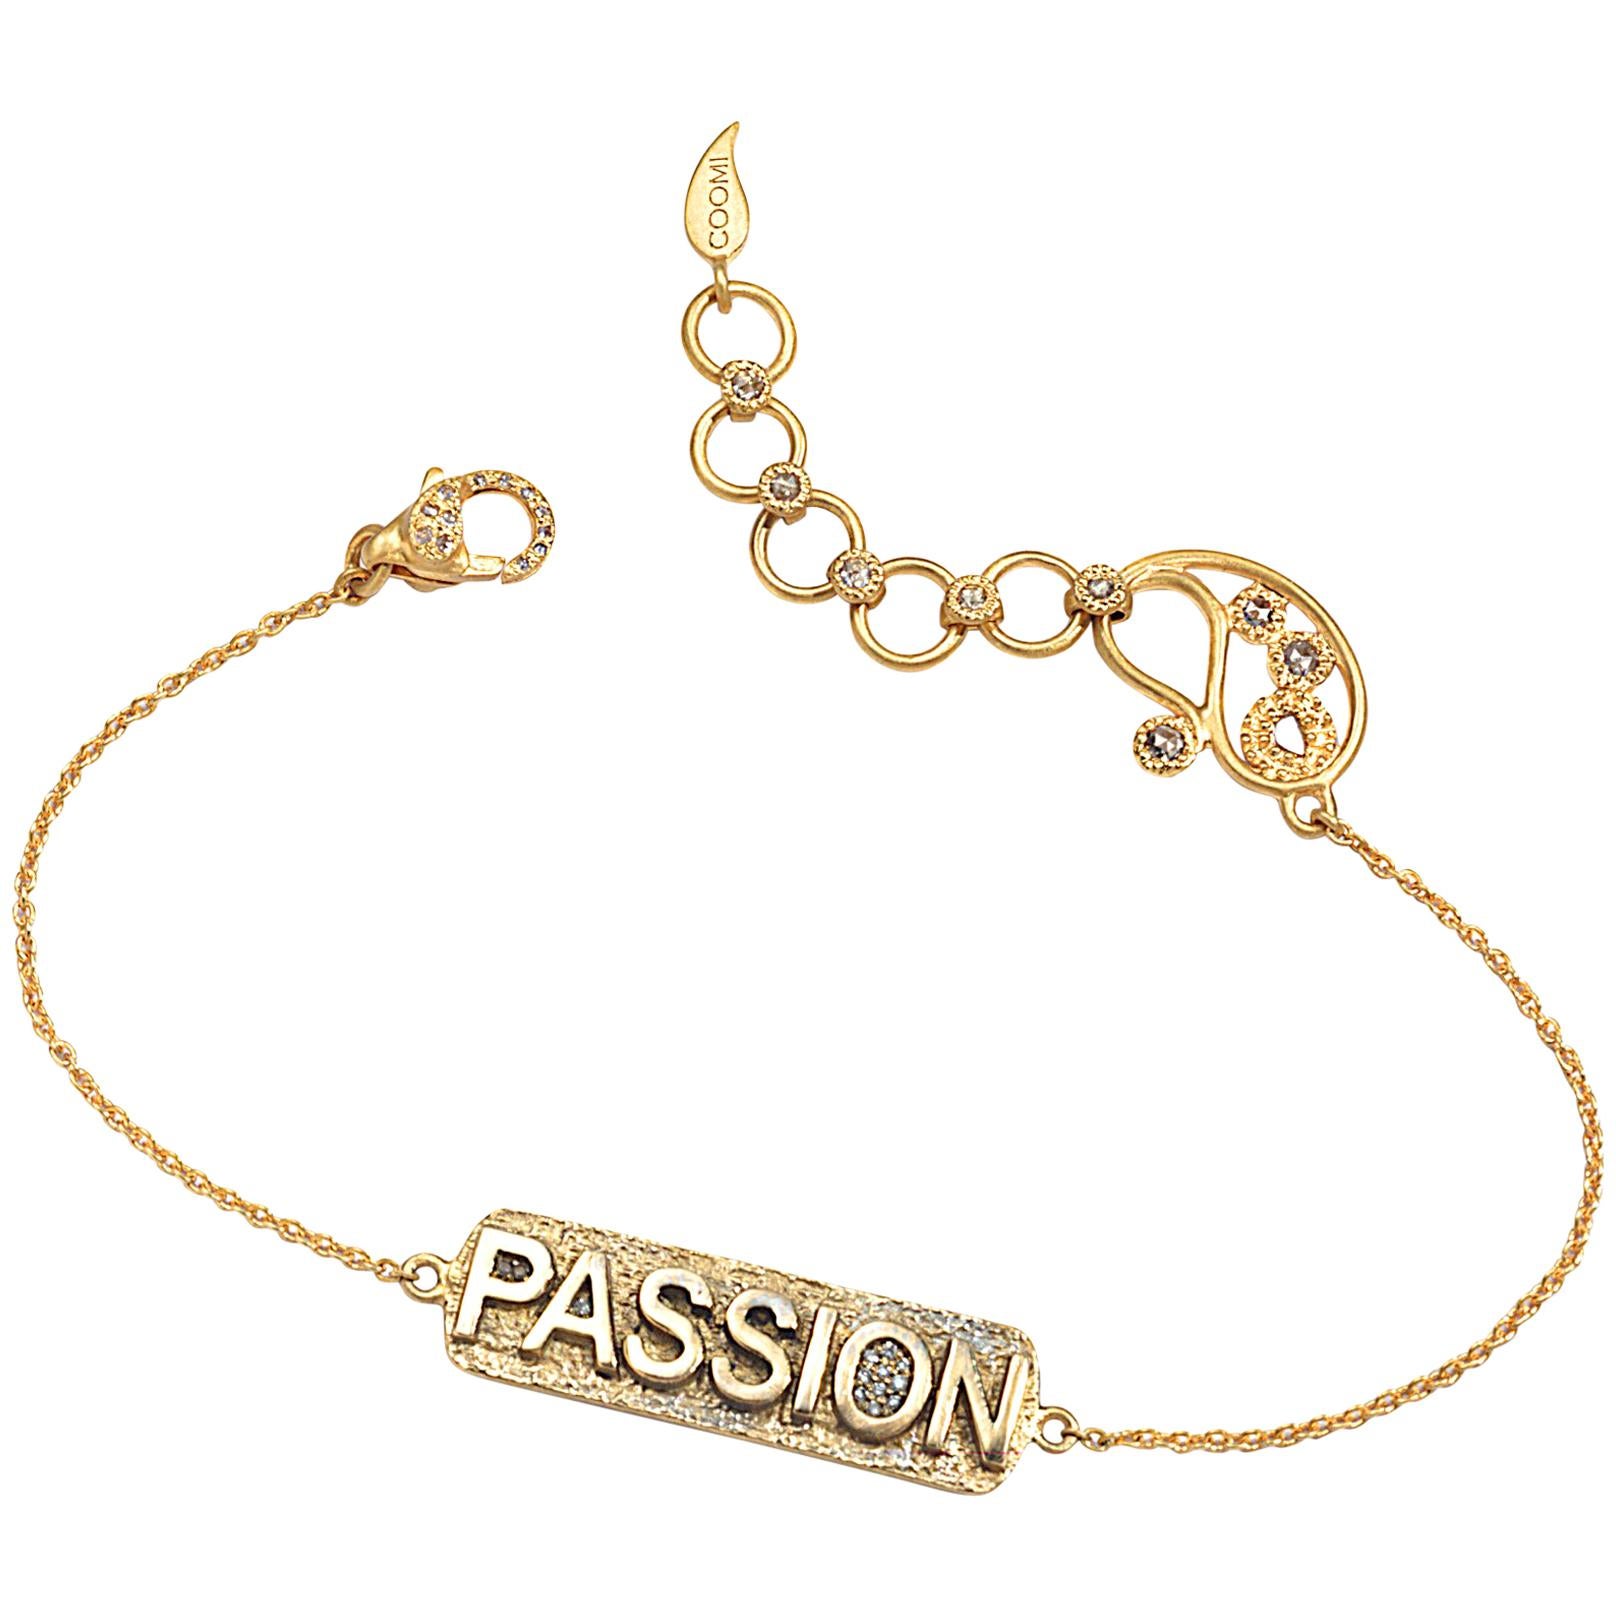 Coomi 20K Gold and Diamond "Passion" ID Bracelet For Sale